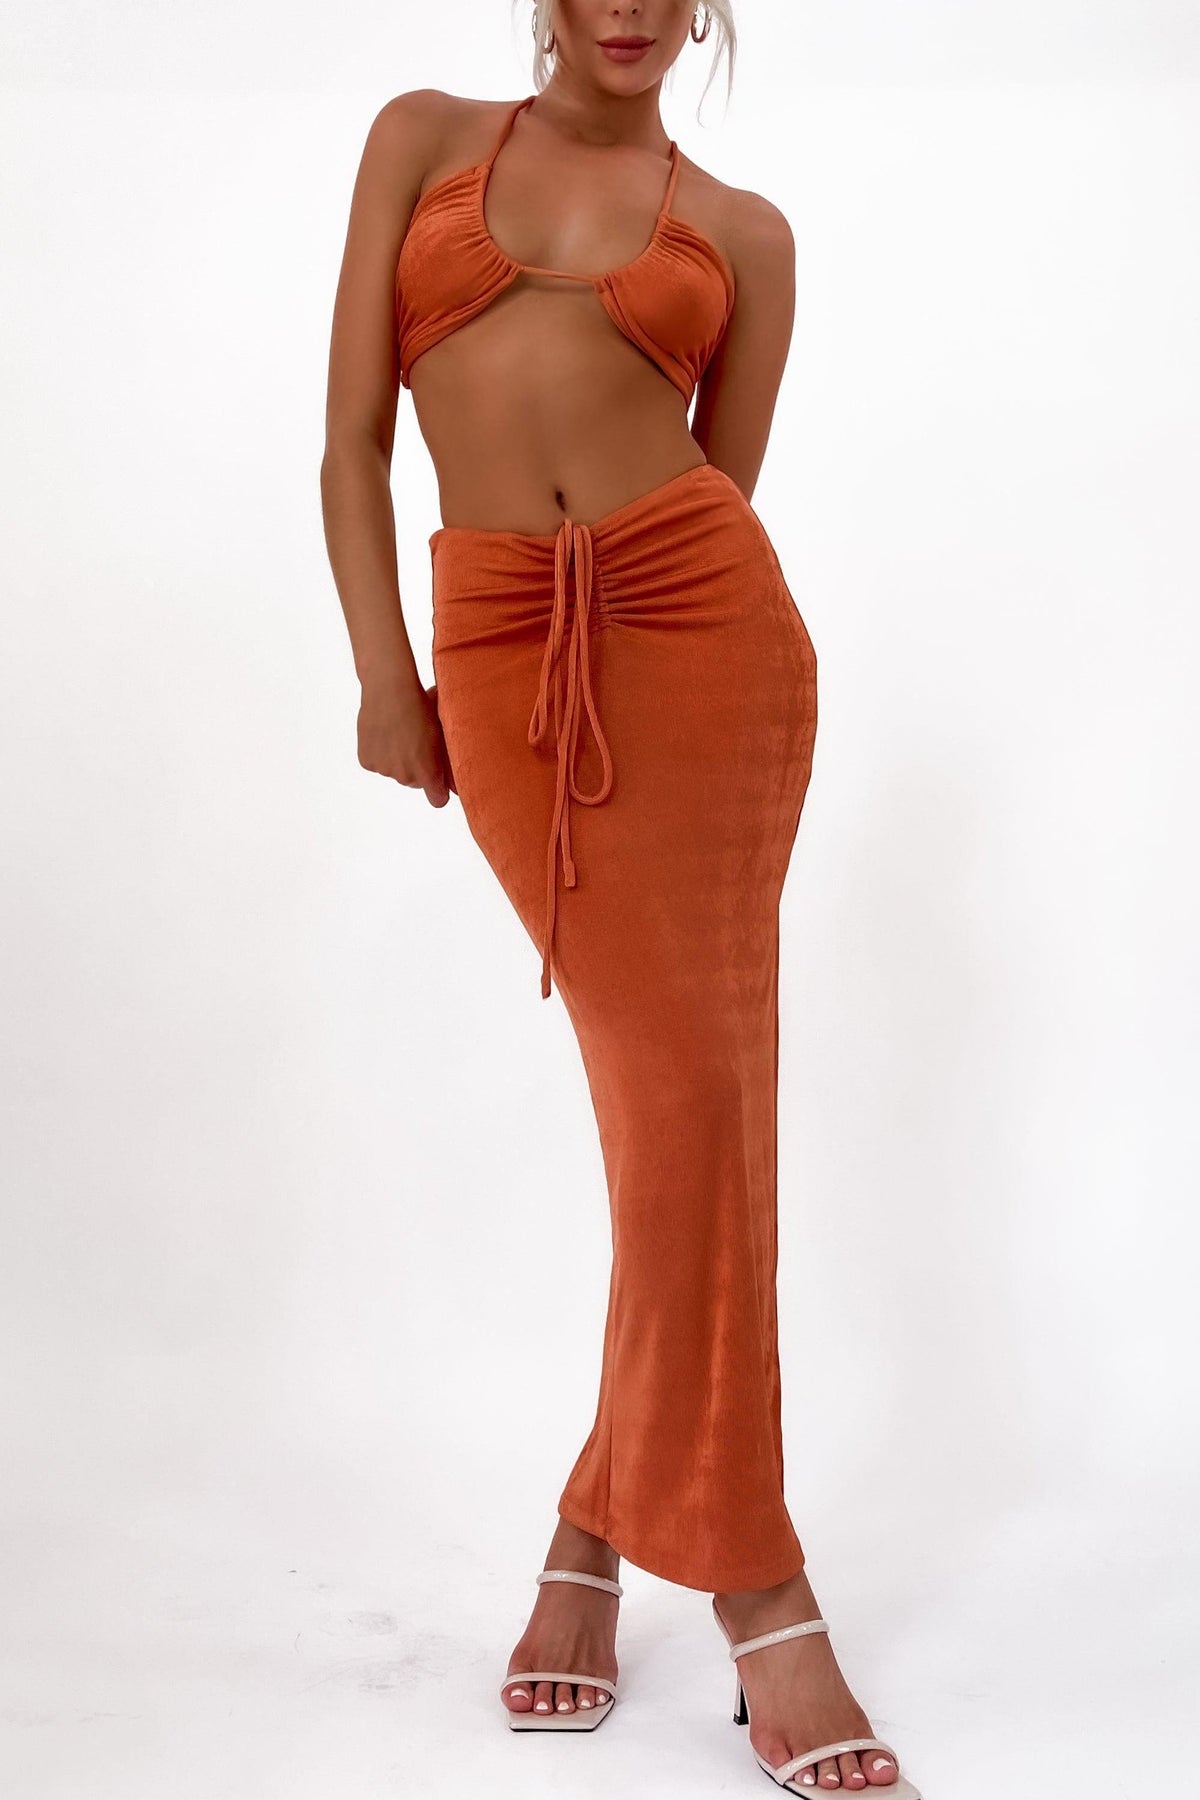 Alarna Top, CROP TOPS, ORANGE, POLYESTER &amp; SPANDEX, POLYESTER AND SPANDEX, Sale, SPANDEX &amp; POLYESTER, SPANDEX AND POLYESTER, TOP, TOPS, Our New Alarna Top Is Now Only $41.00 Exclusive At Mishkah, Our New Alarna Top is now only $41.00-We Have The Latest Women&#39;s Tops @ Mishkah Online Fashion Boutique-MISHKAH